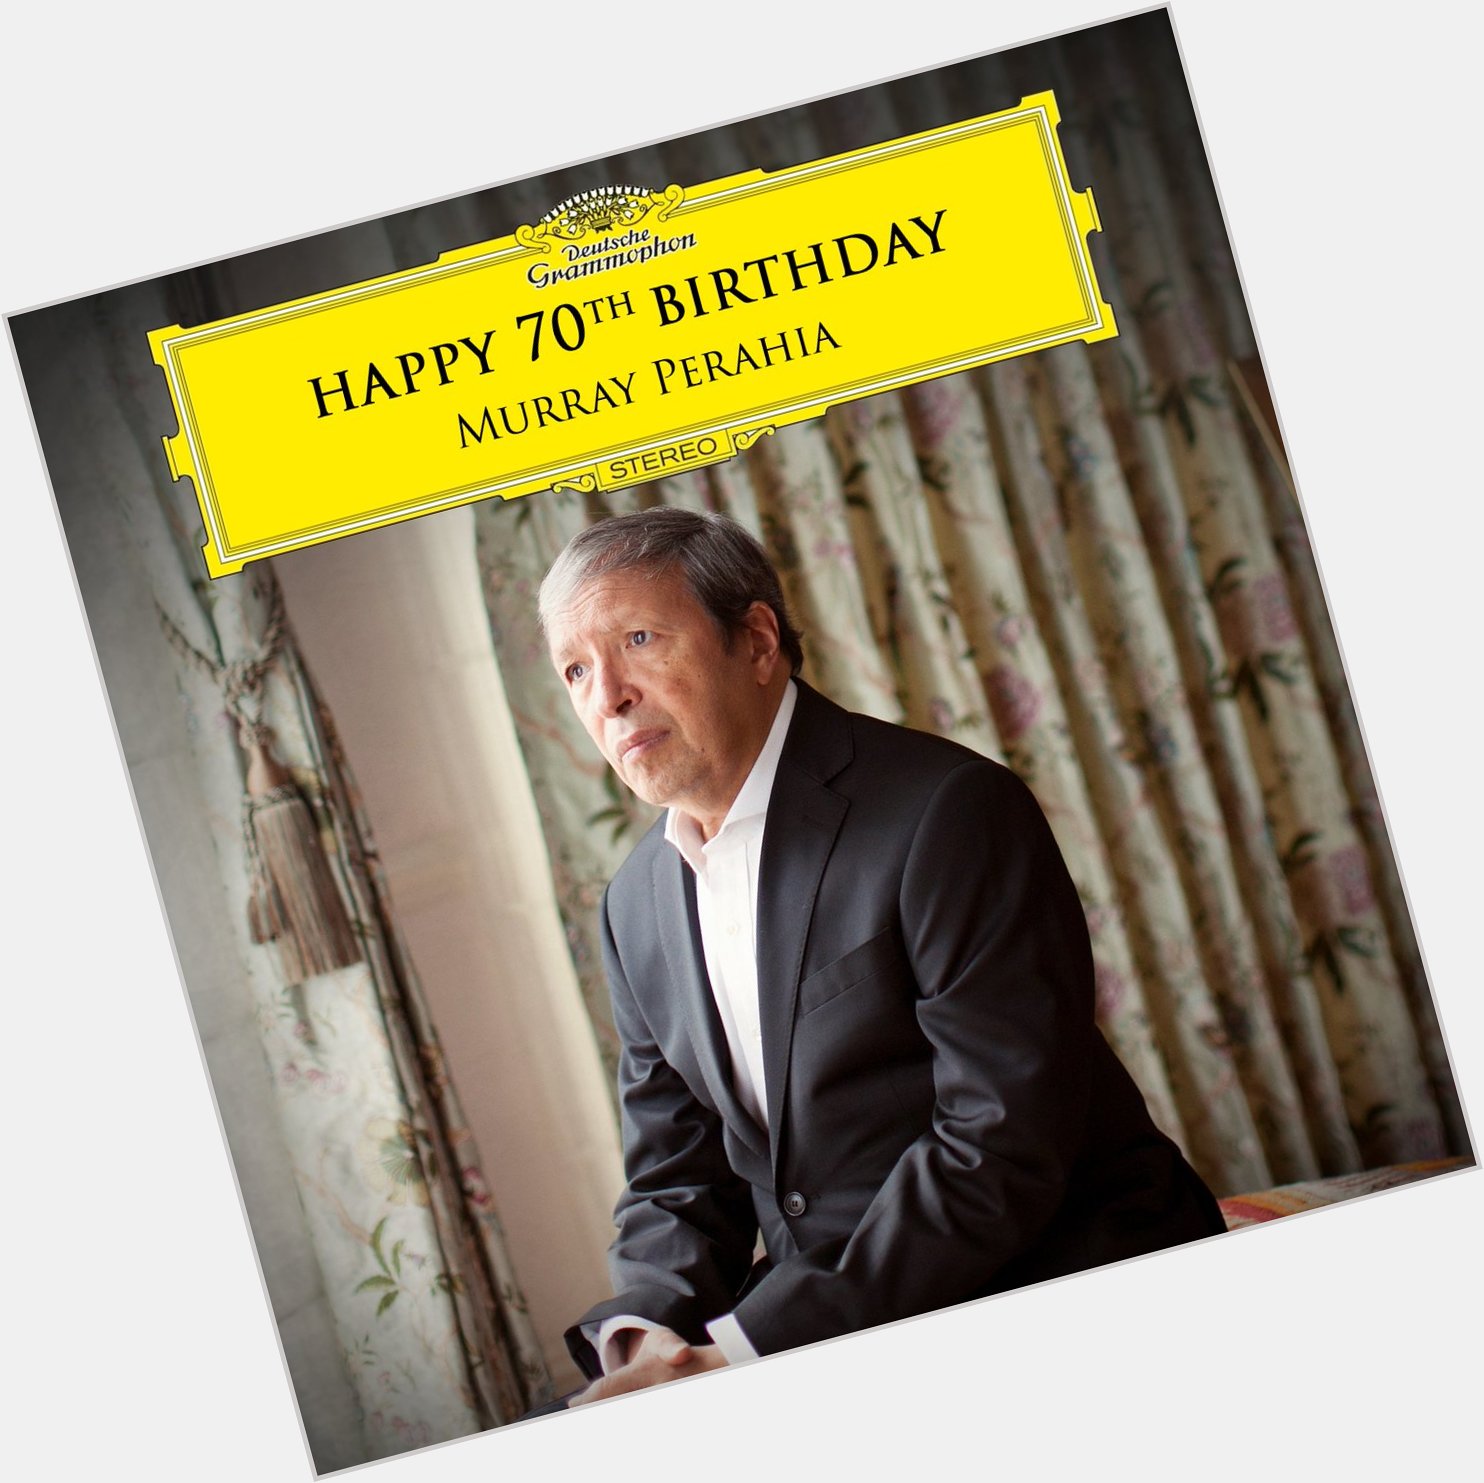 Via \"Happy 70th birthday, Murray Perahia!
The Bach French Suites, here: 